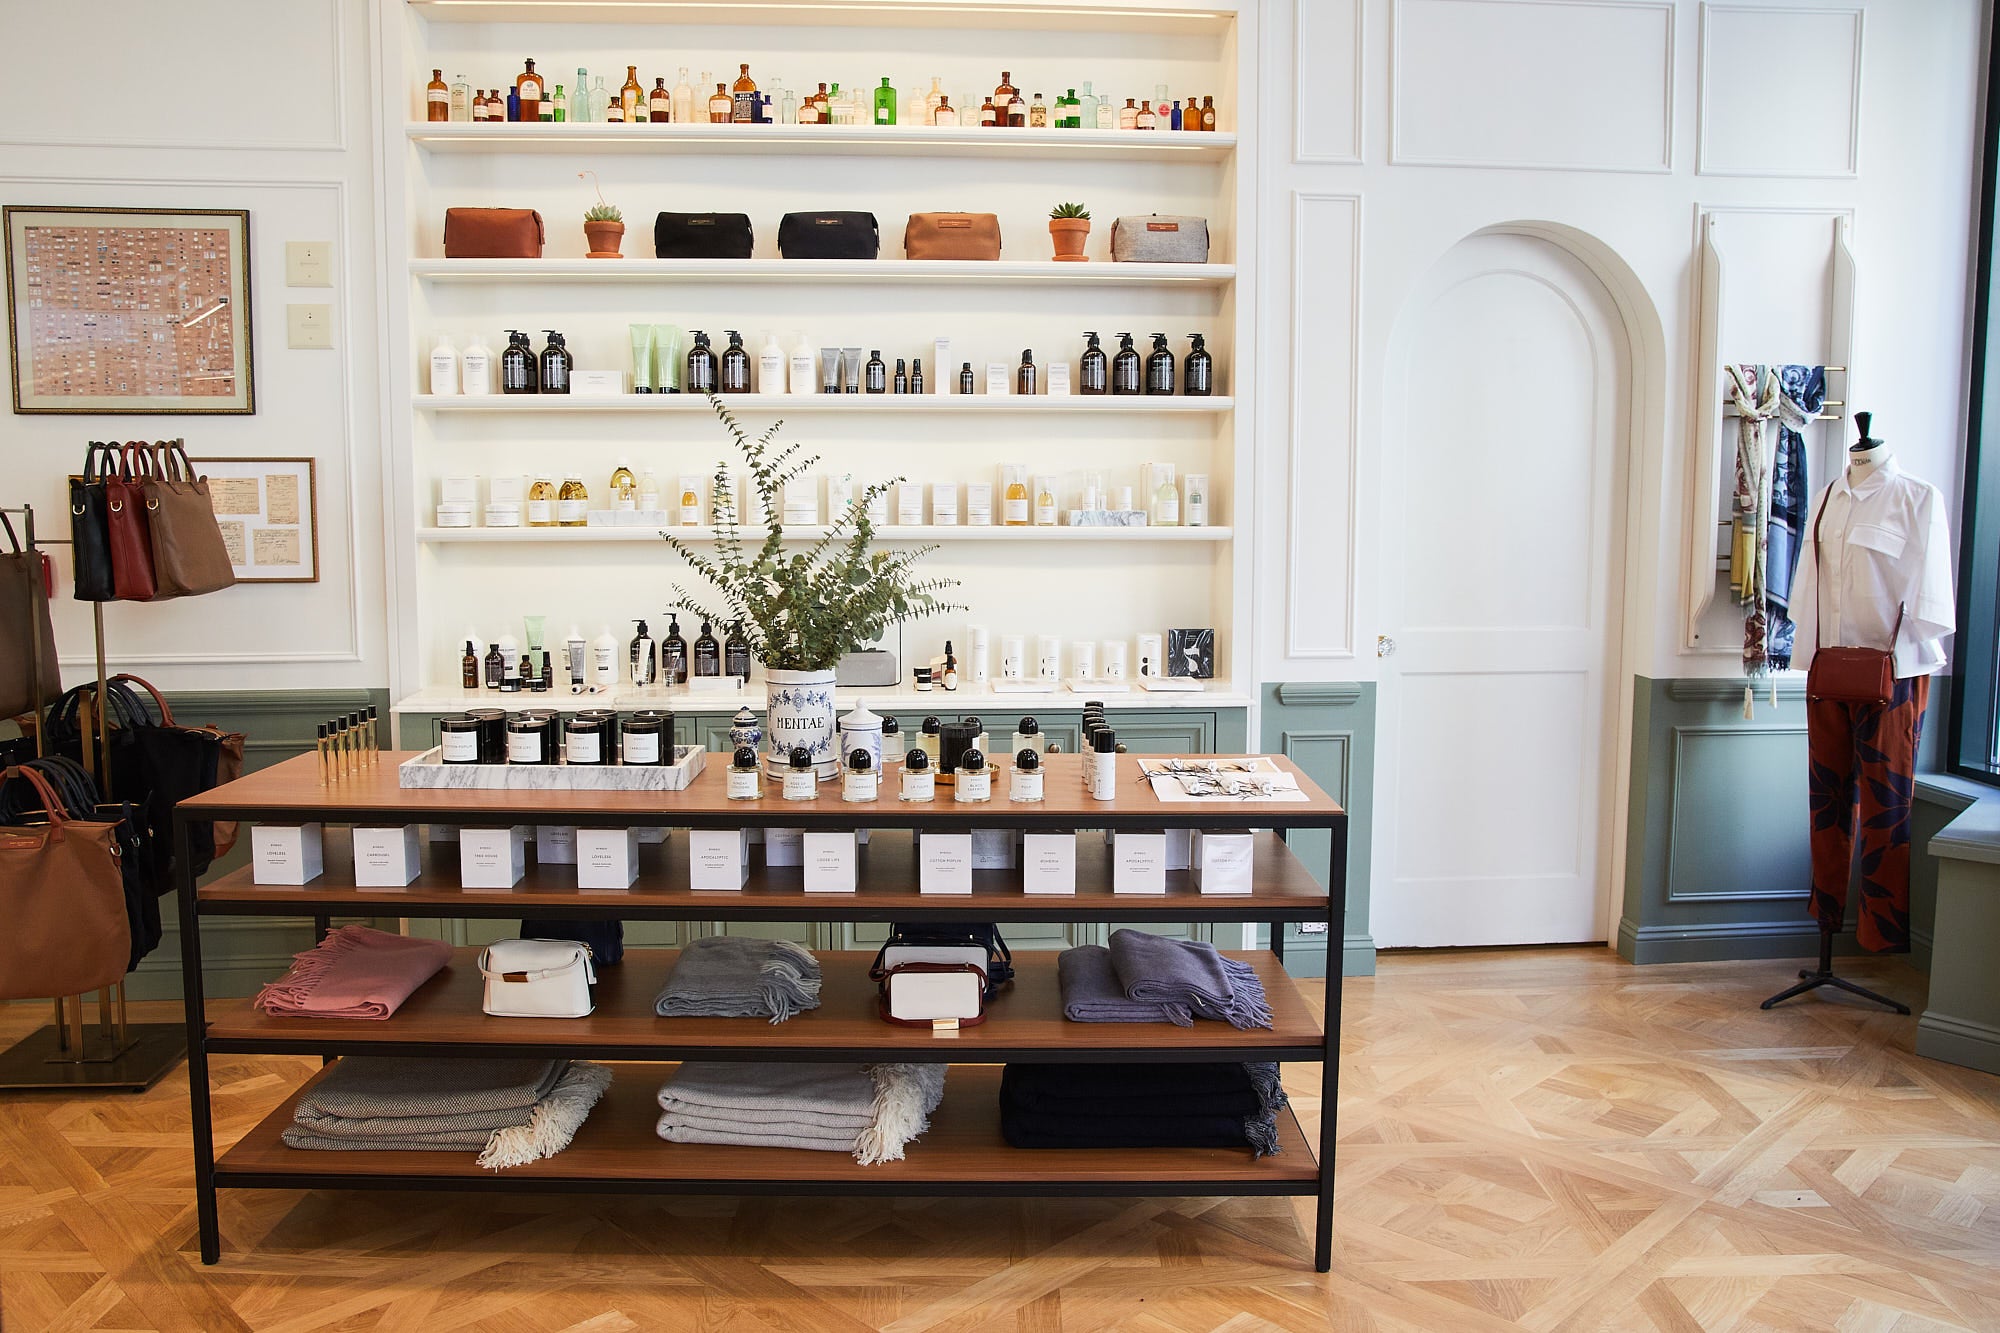 Want Apothecary Opens in New York